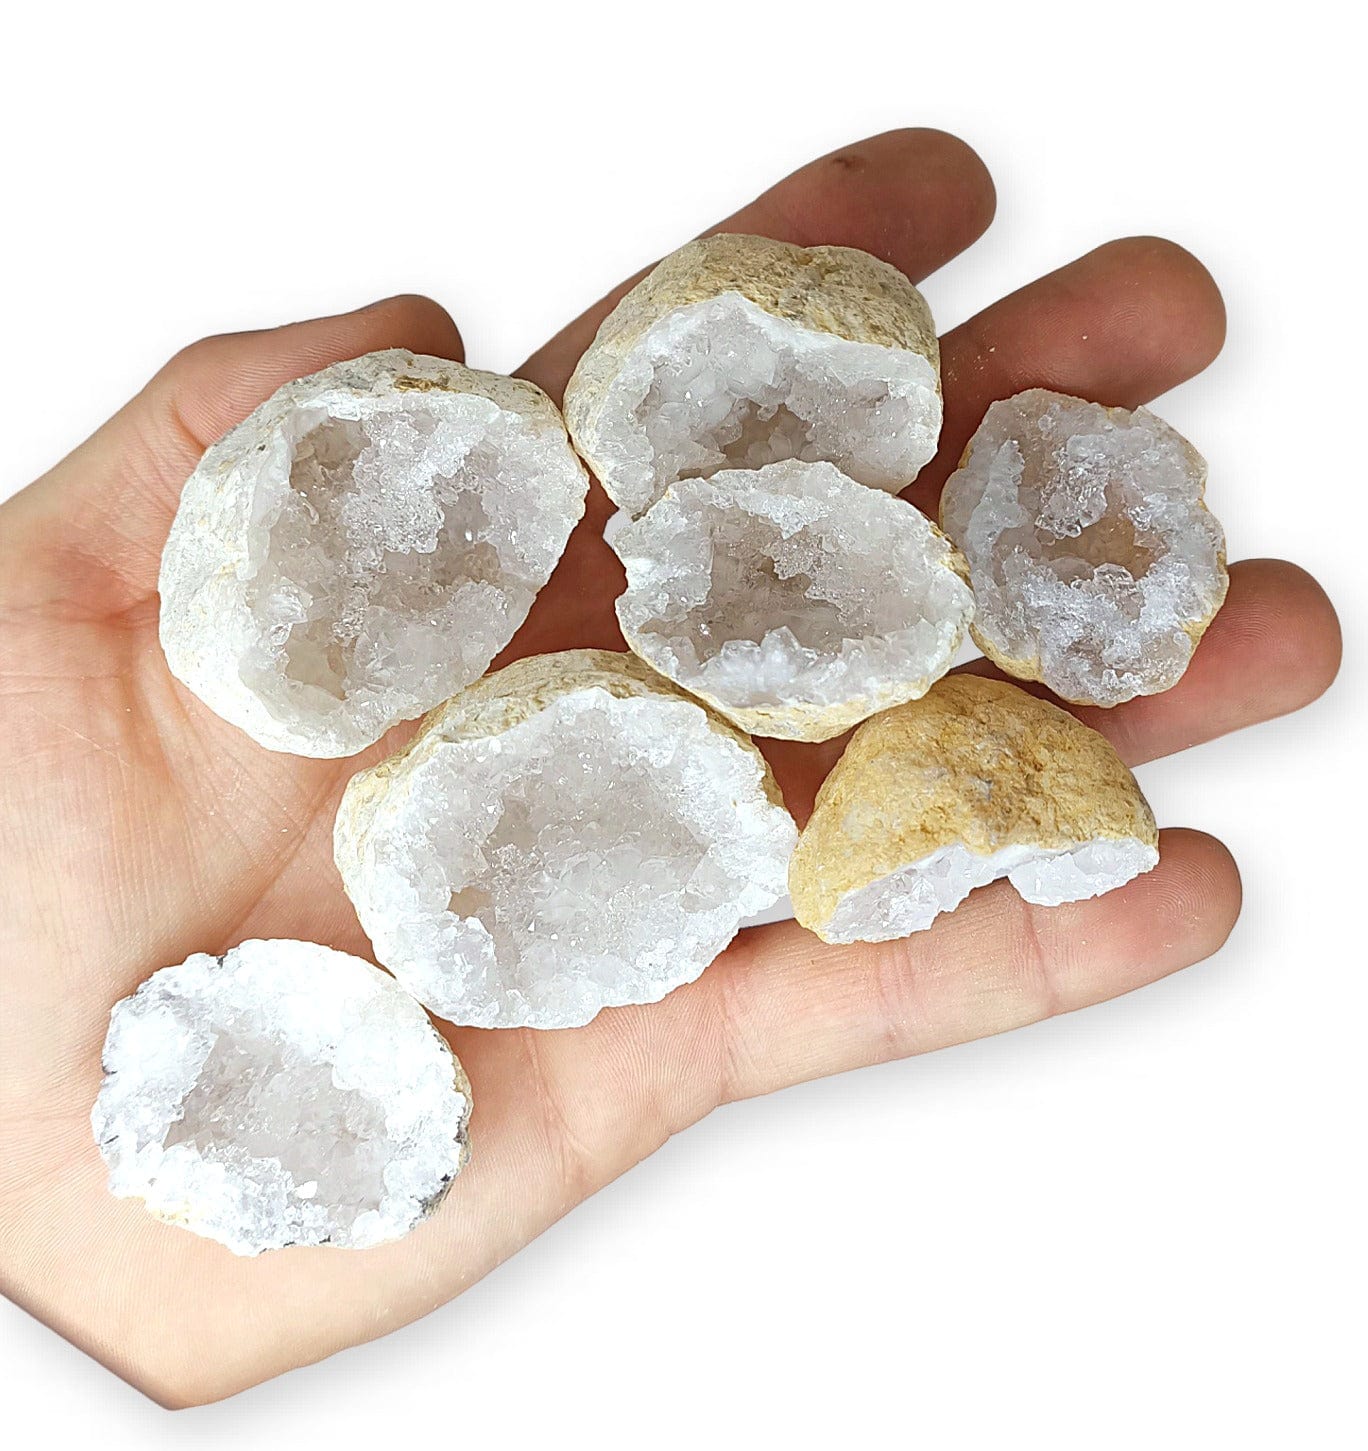 Raw white calcite - Druses and Geodes